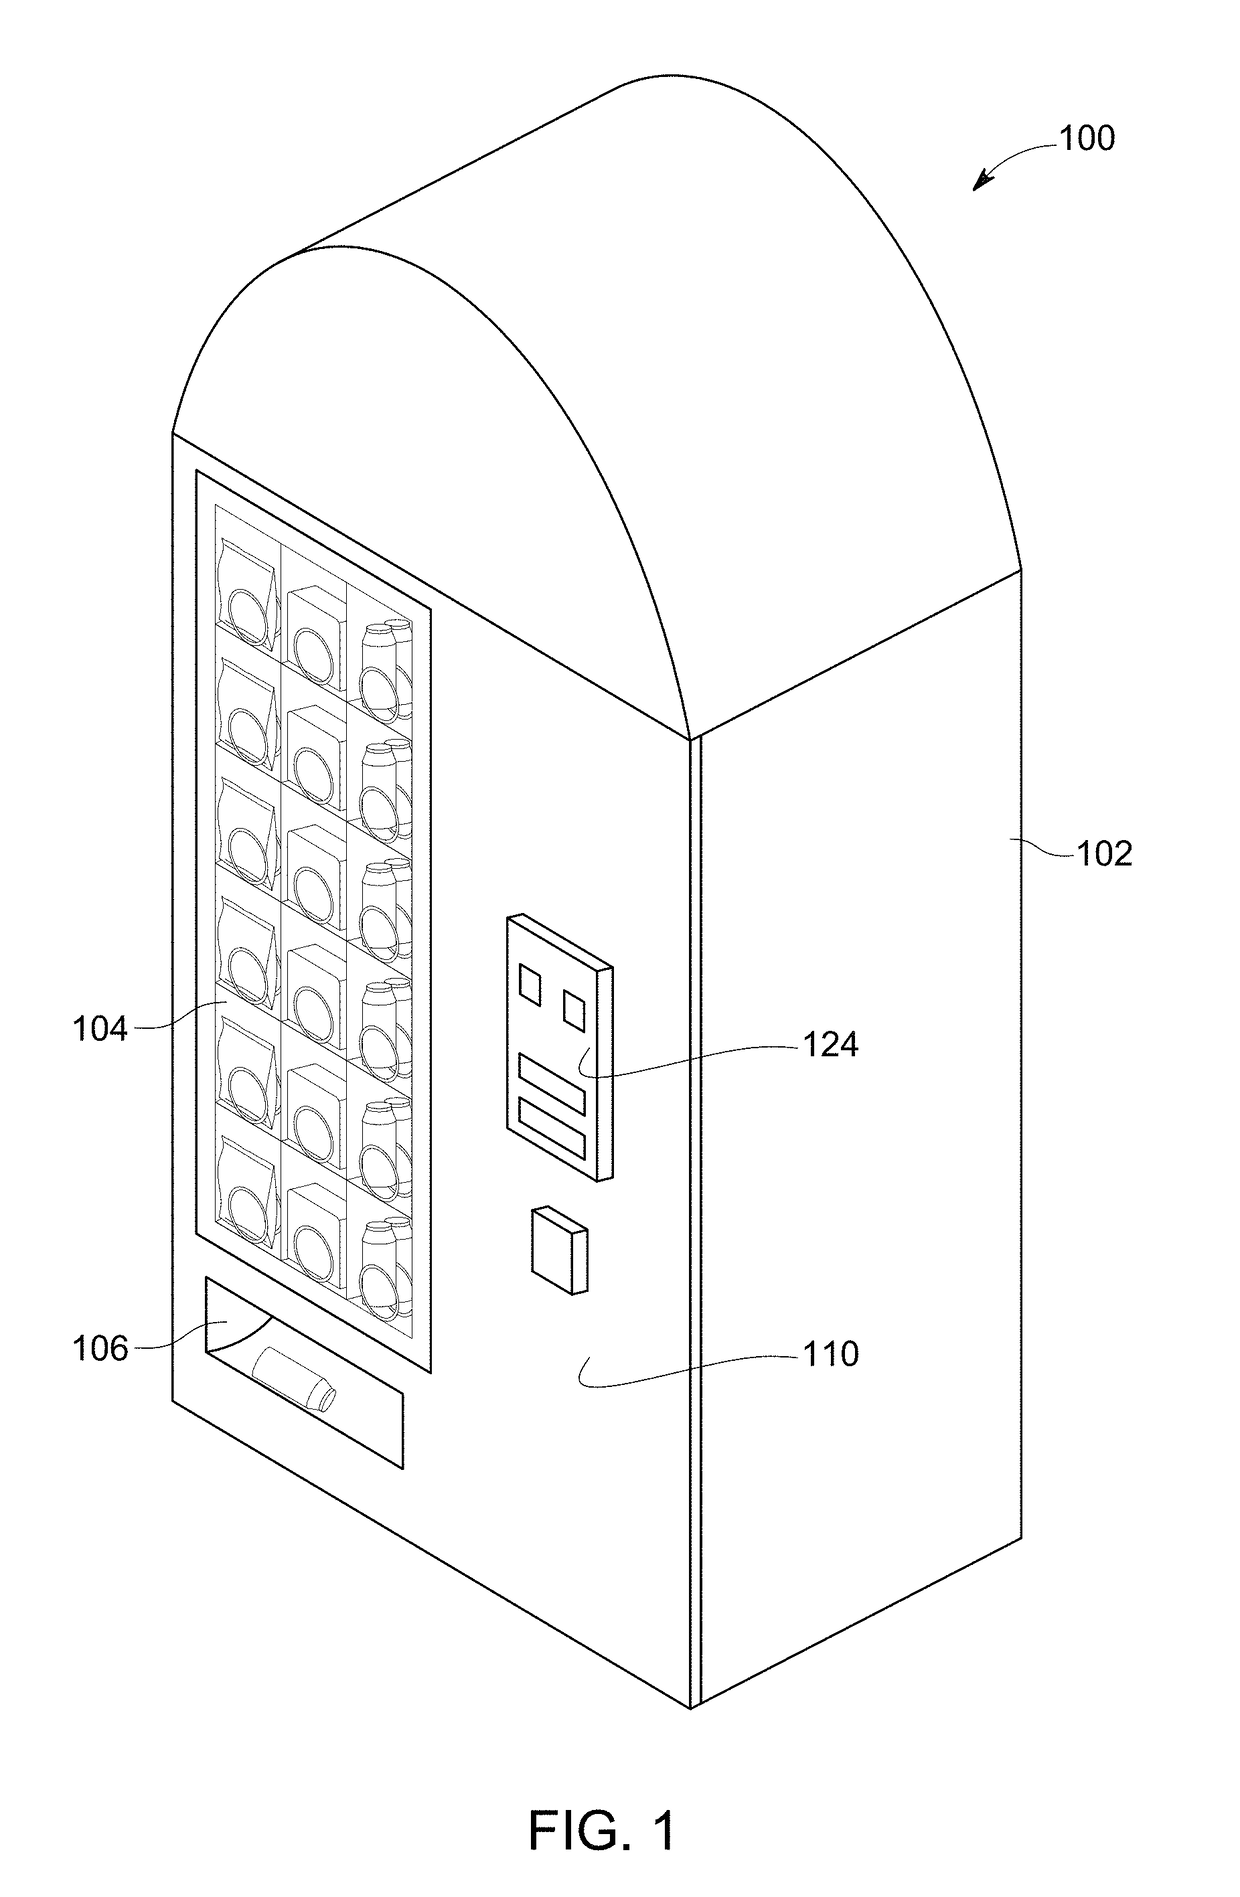 Adapter device for obtaining payments and monitoring inventory levels of a vending machine